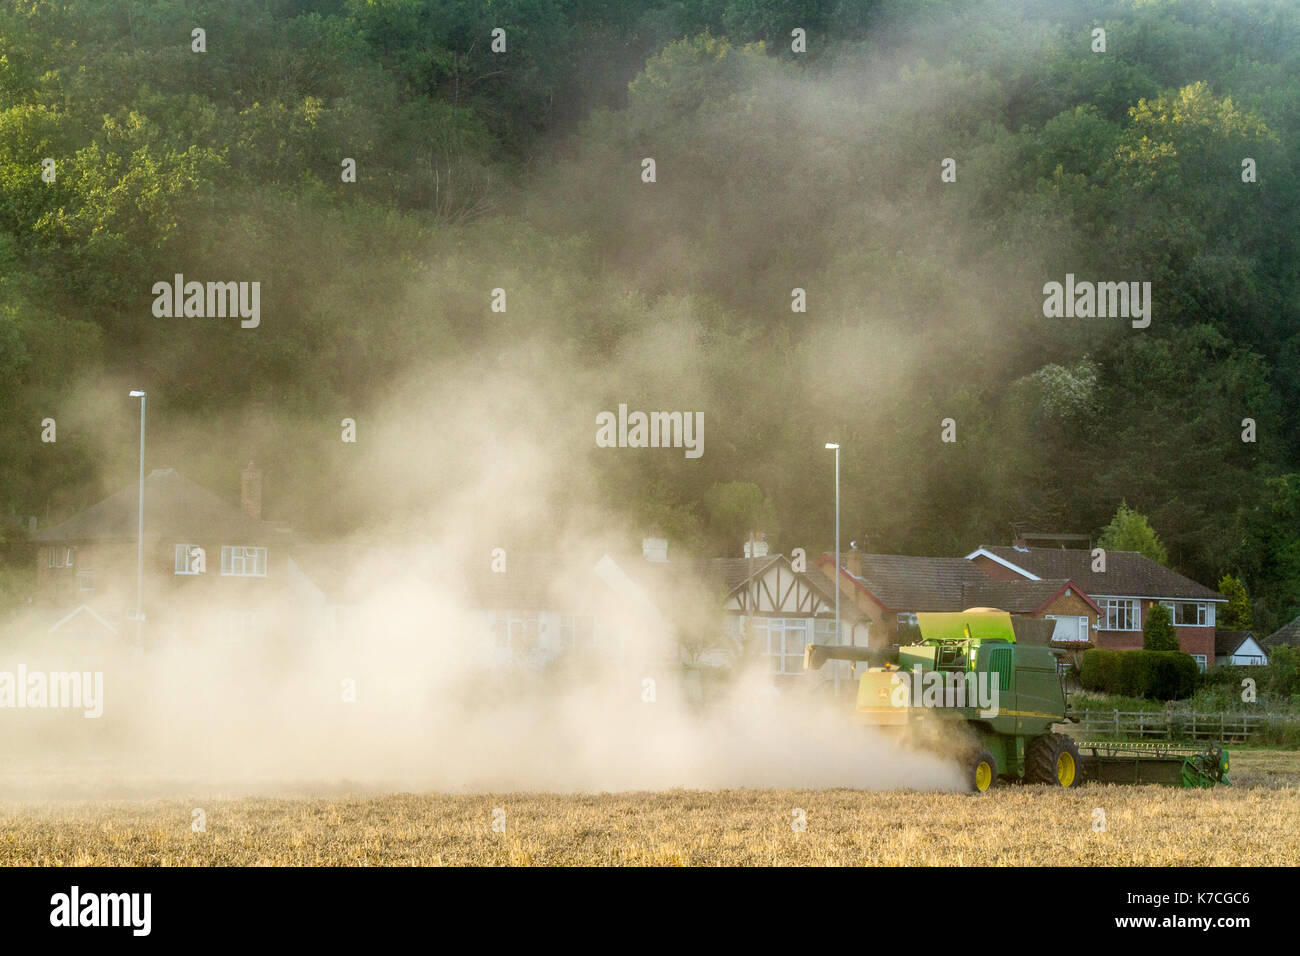 Rural environmental issues. Air pollution in the countryside. Combine harvester causing wheat grain dust near housing, Nottinghamshire, England, UK Stock Photo